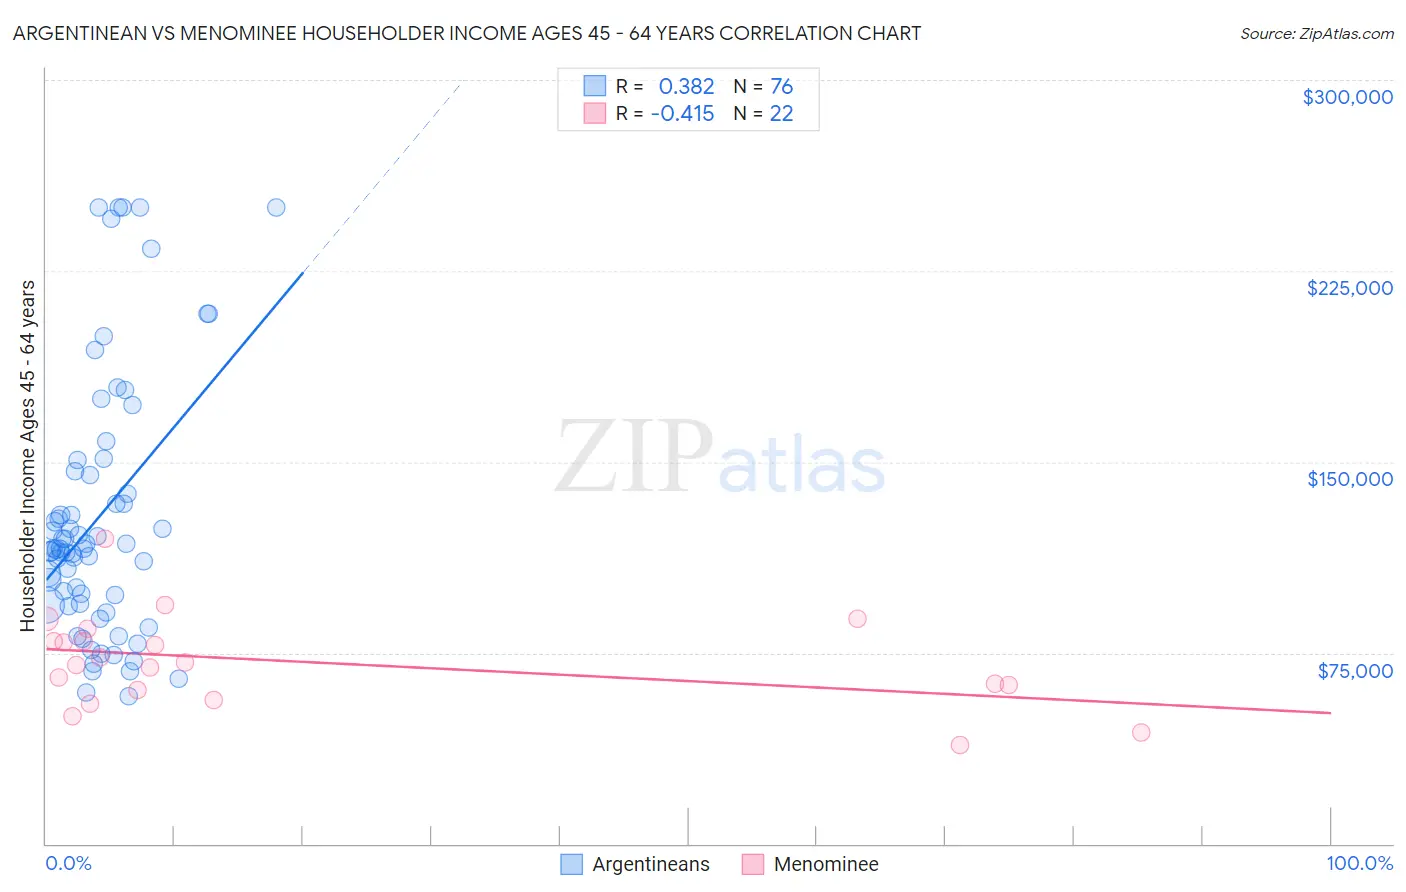 Argentinean vs Menominee Householder Income Ages 45 - 64 years